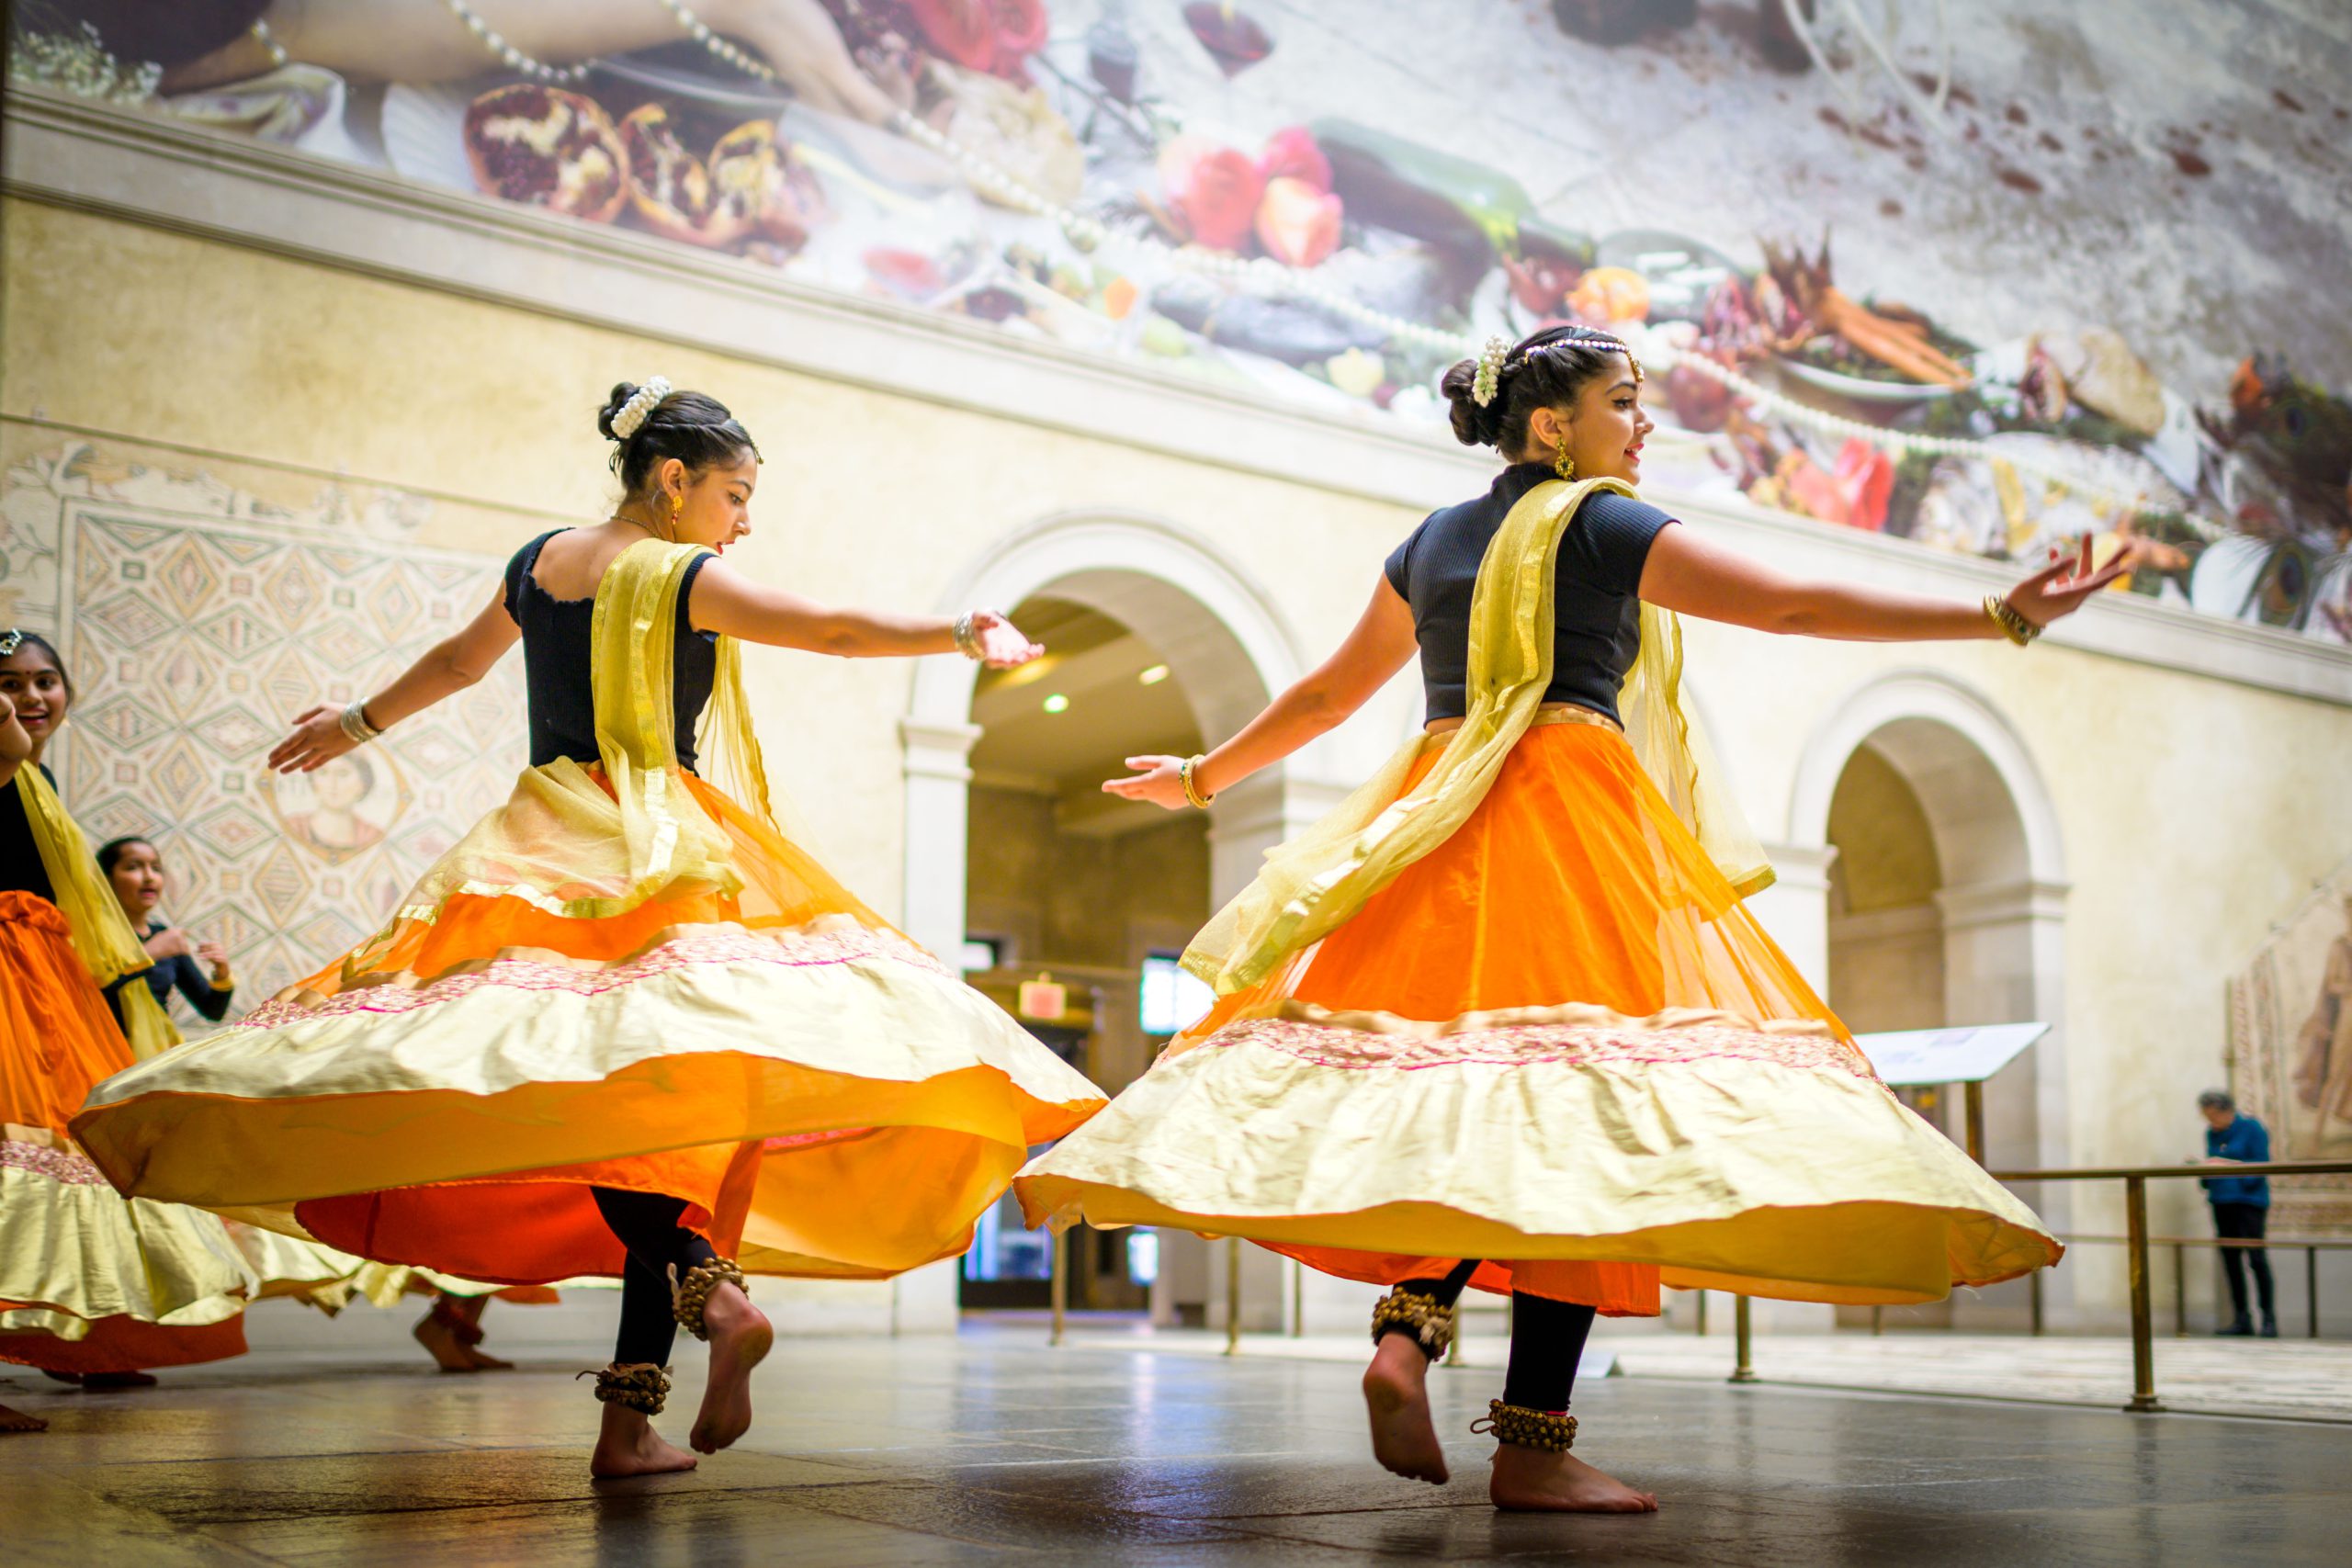 Dancers performing during a Diwali event at WAM